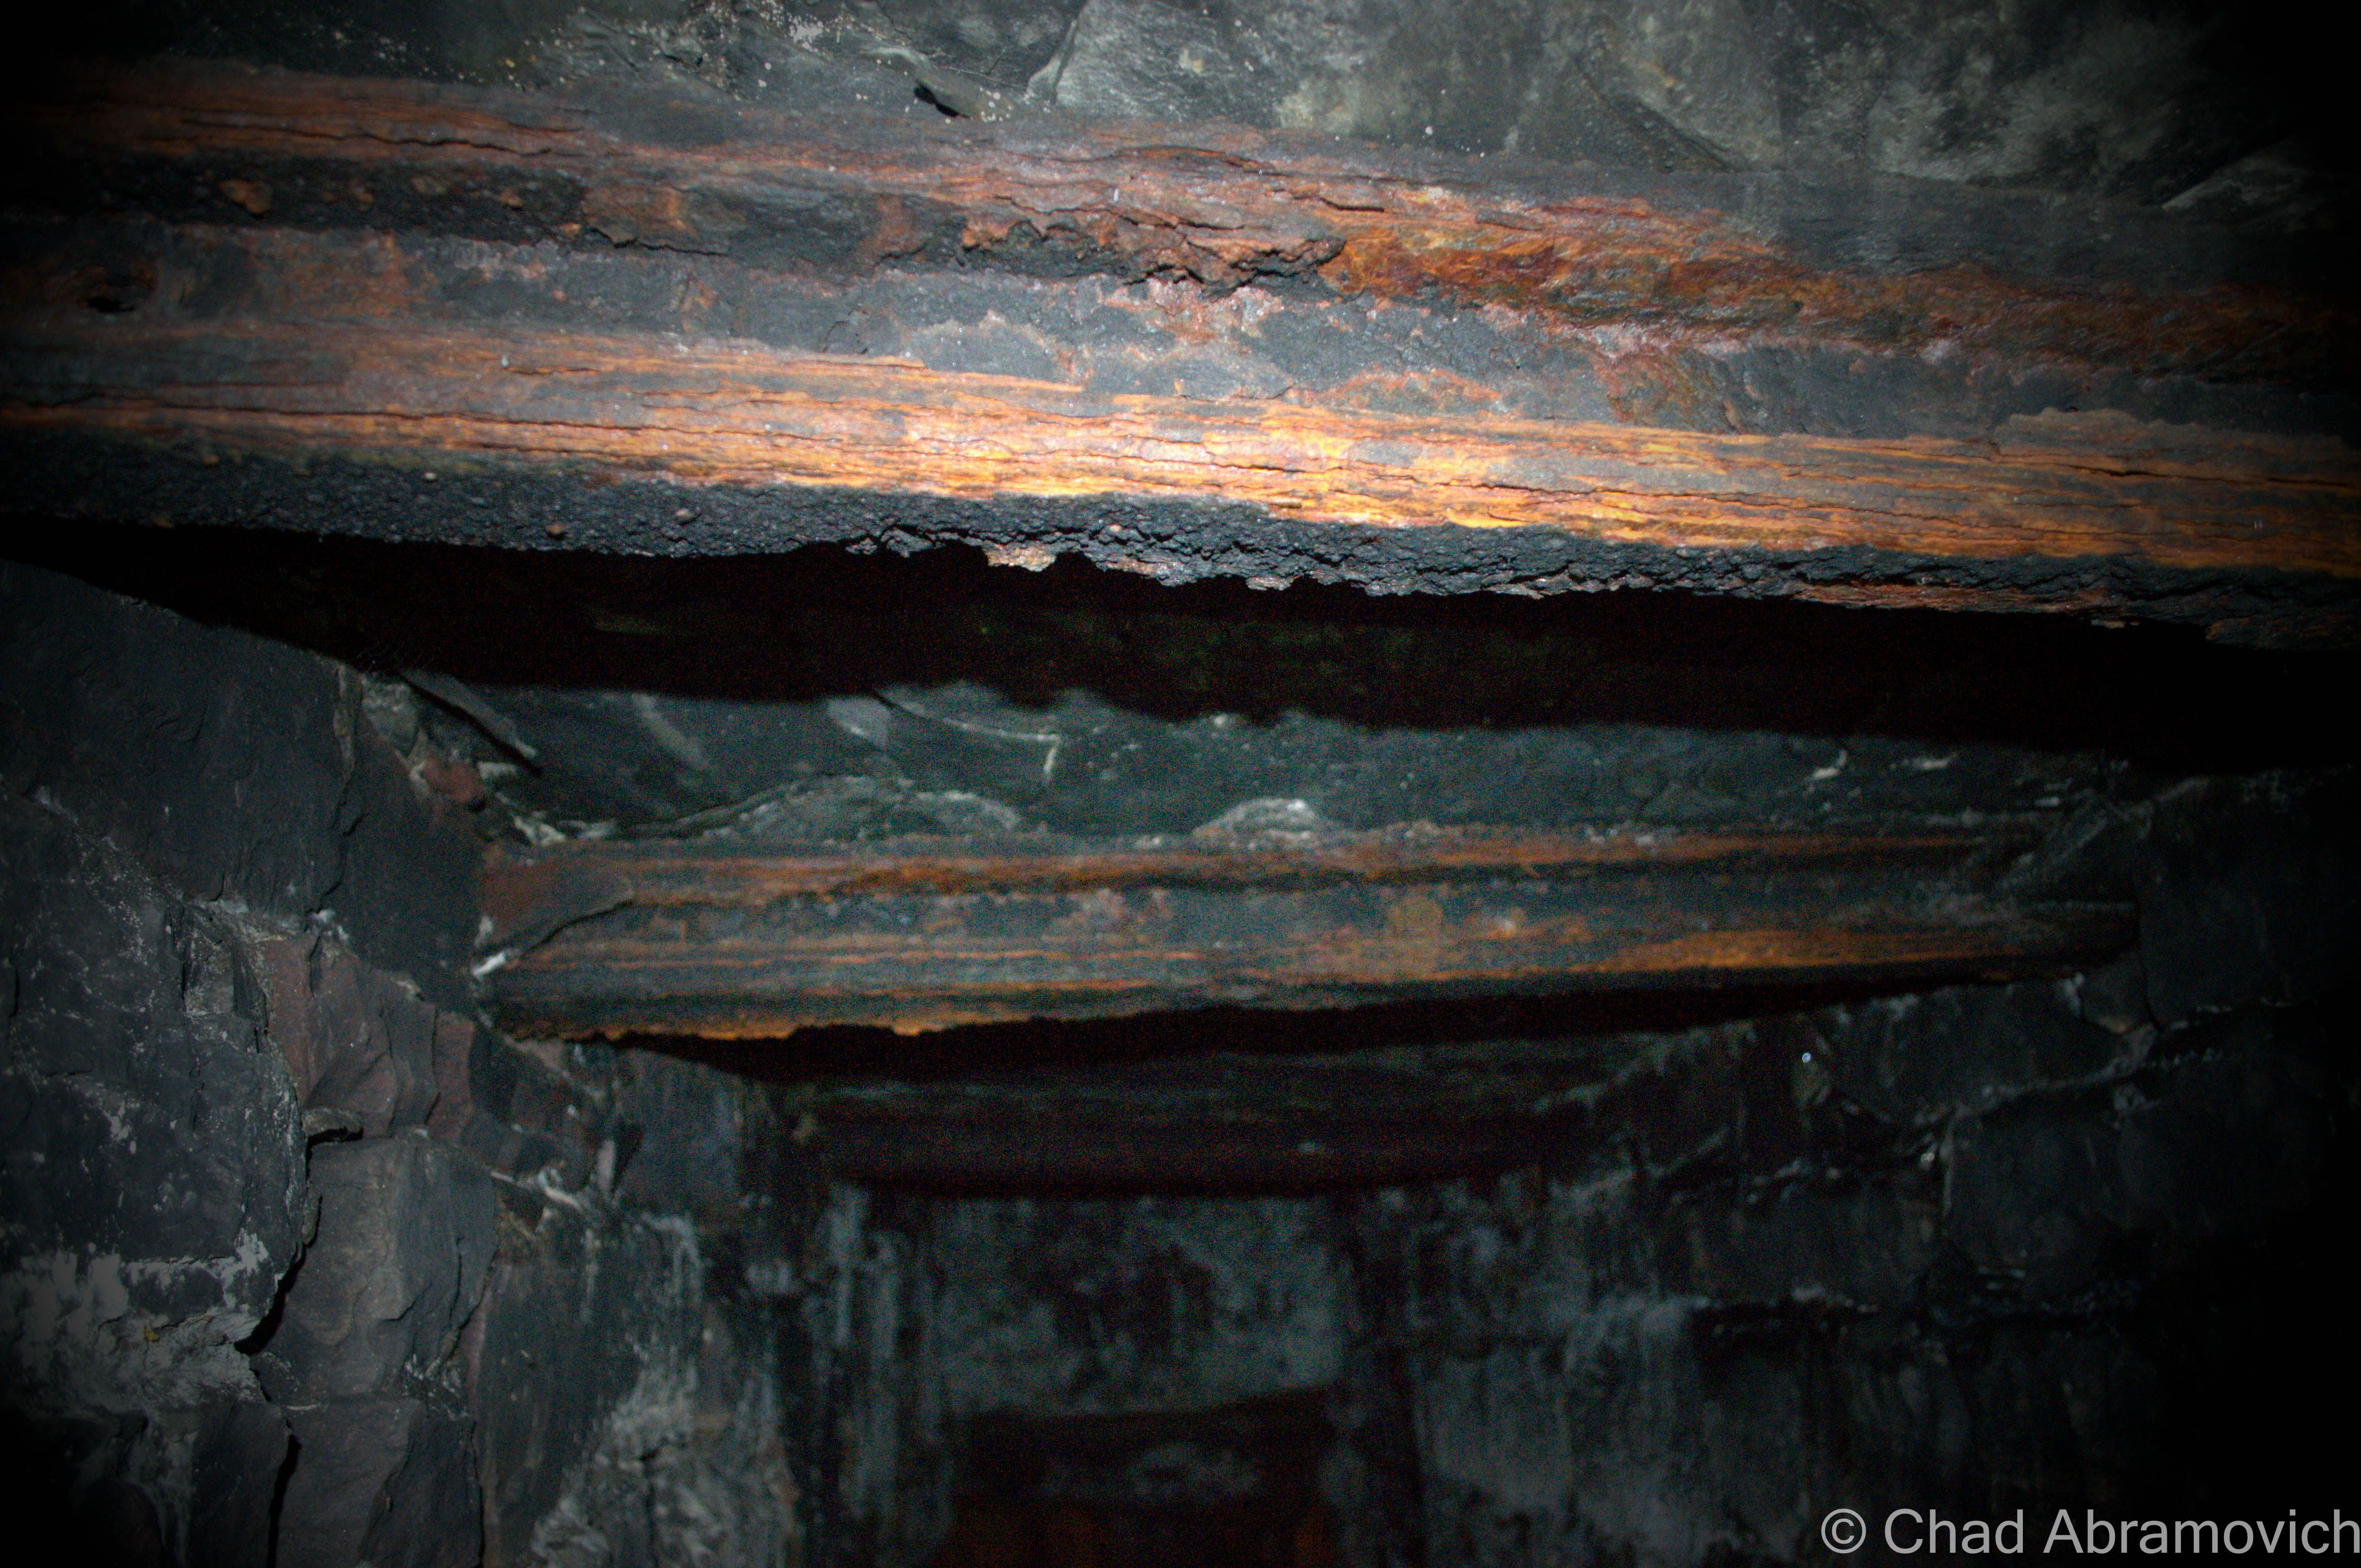 Railroad ties that spanned the ceiling were used in some of the tunnel’s construction